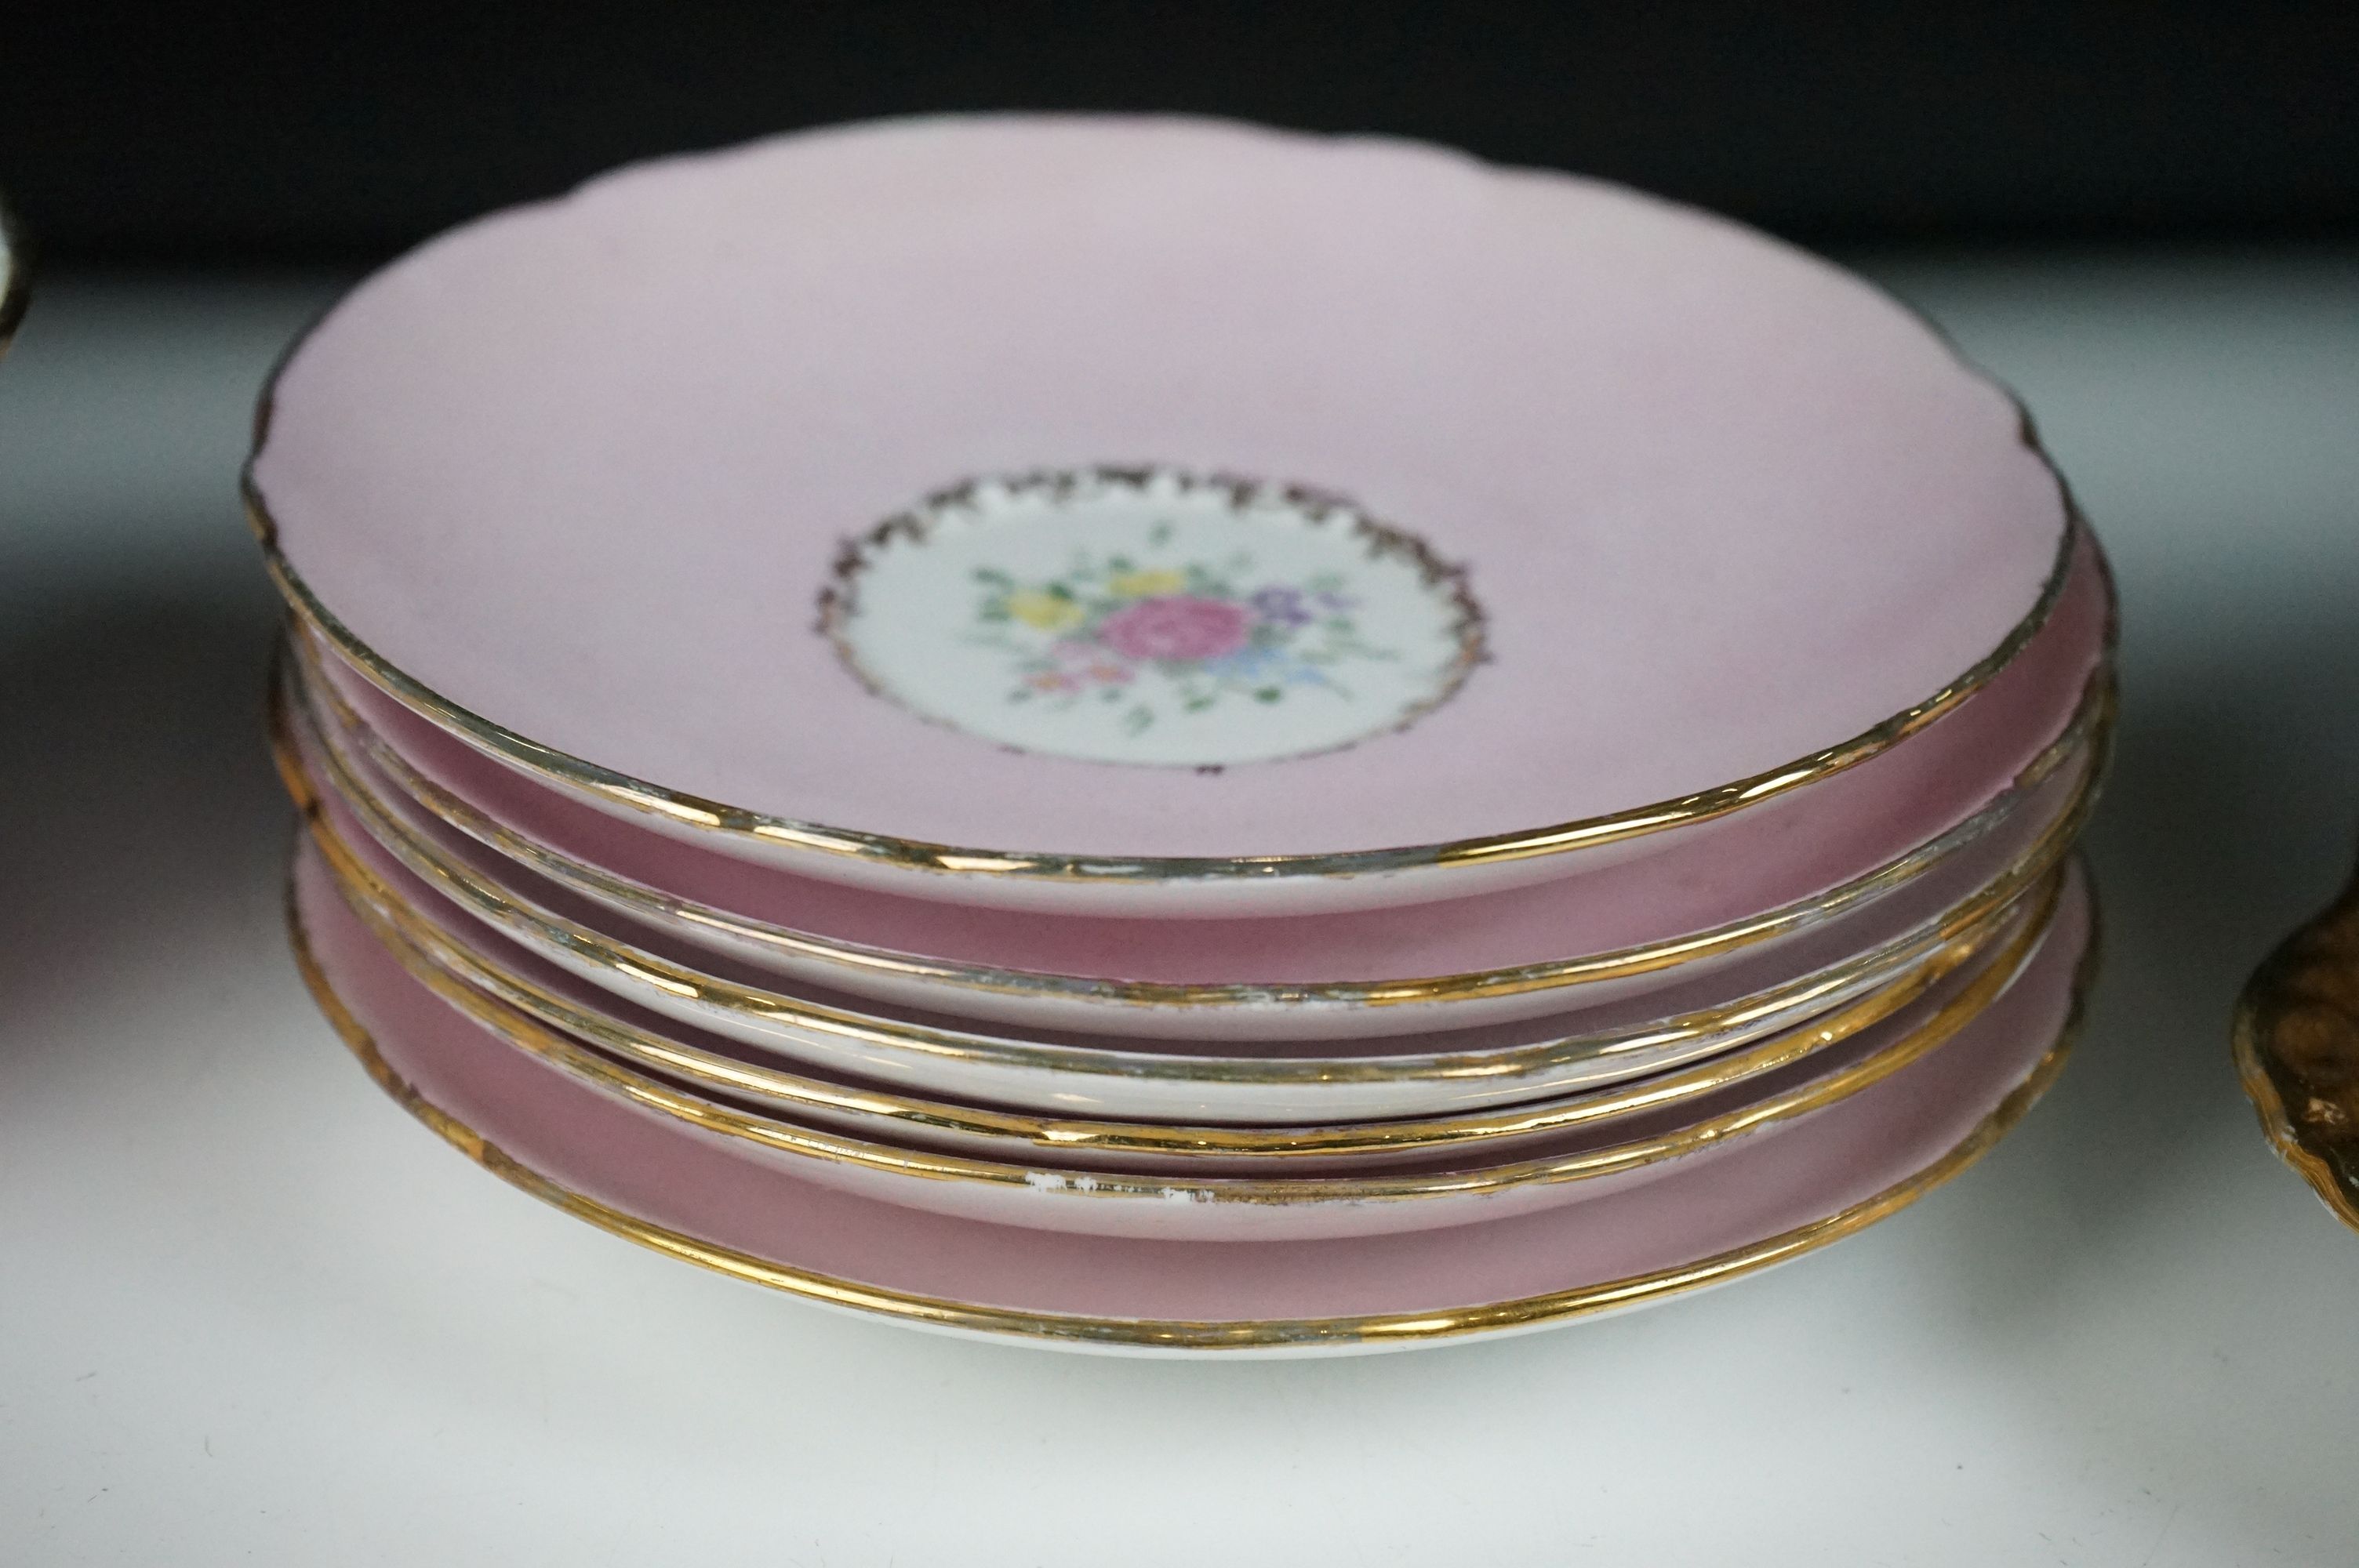 Early 20th Century Shelley hand painted floral tea ware on pink and white ground, with gilt - Image 6 of 12